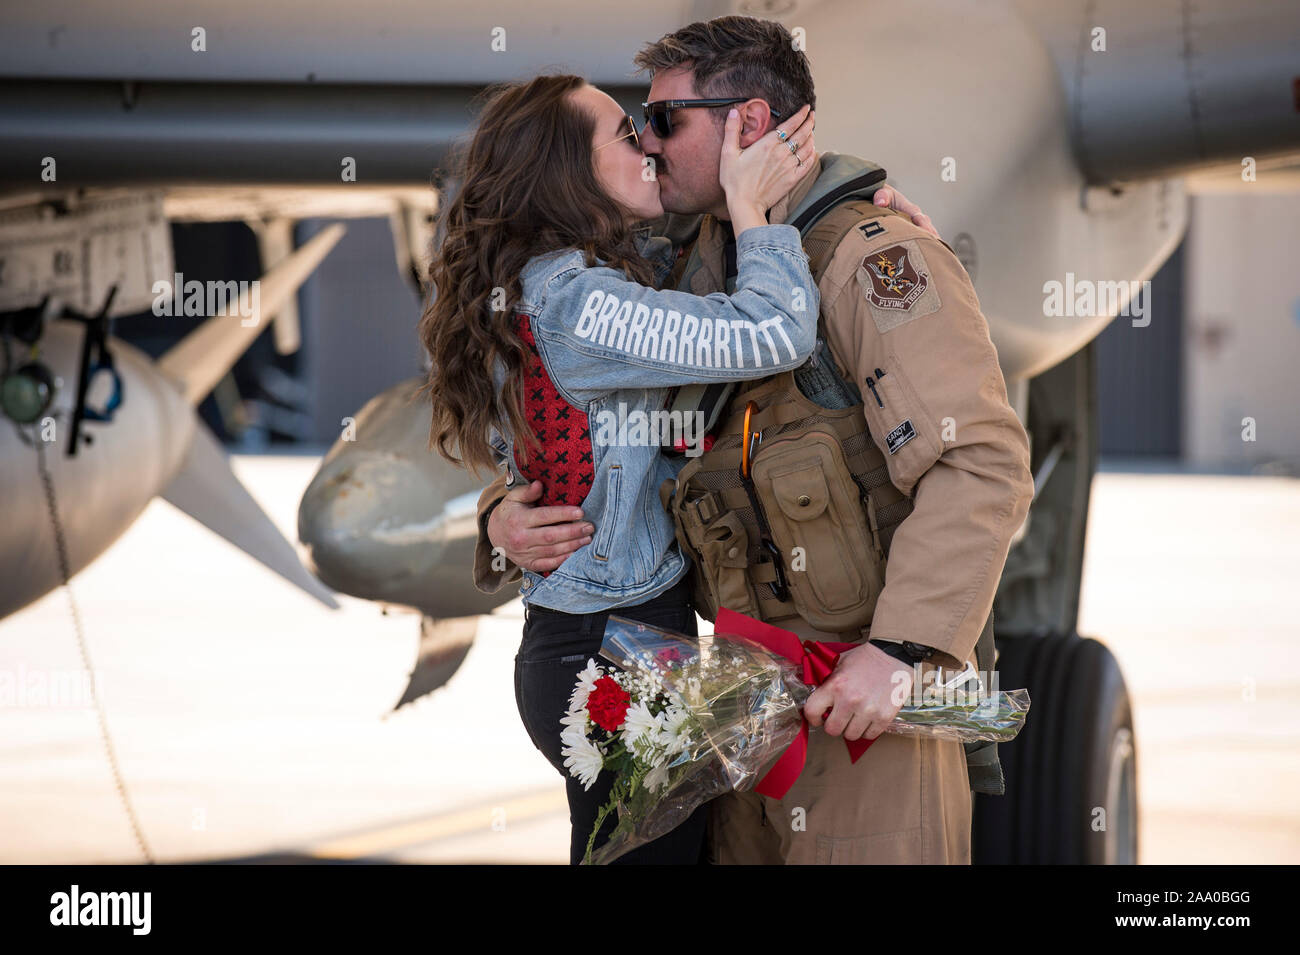 U.S. Air Force Capt. Daniel Lagomarsino, 75th Fighter Squadron A-10C Thunderbolt II pilot, and his girlfriend, Kacey Borden, share an embrace during a redeployment at Moody Air Force Base, Ga., Jan. 25, 2019.  The 75th FS returned from Southwest Asia after a six-month deployment in support of Operation Freedom's Sentinel. (U. S. Air Force photo by Andrea Jenkins) Stock Photo